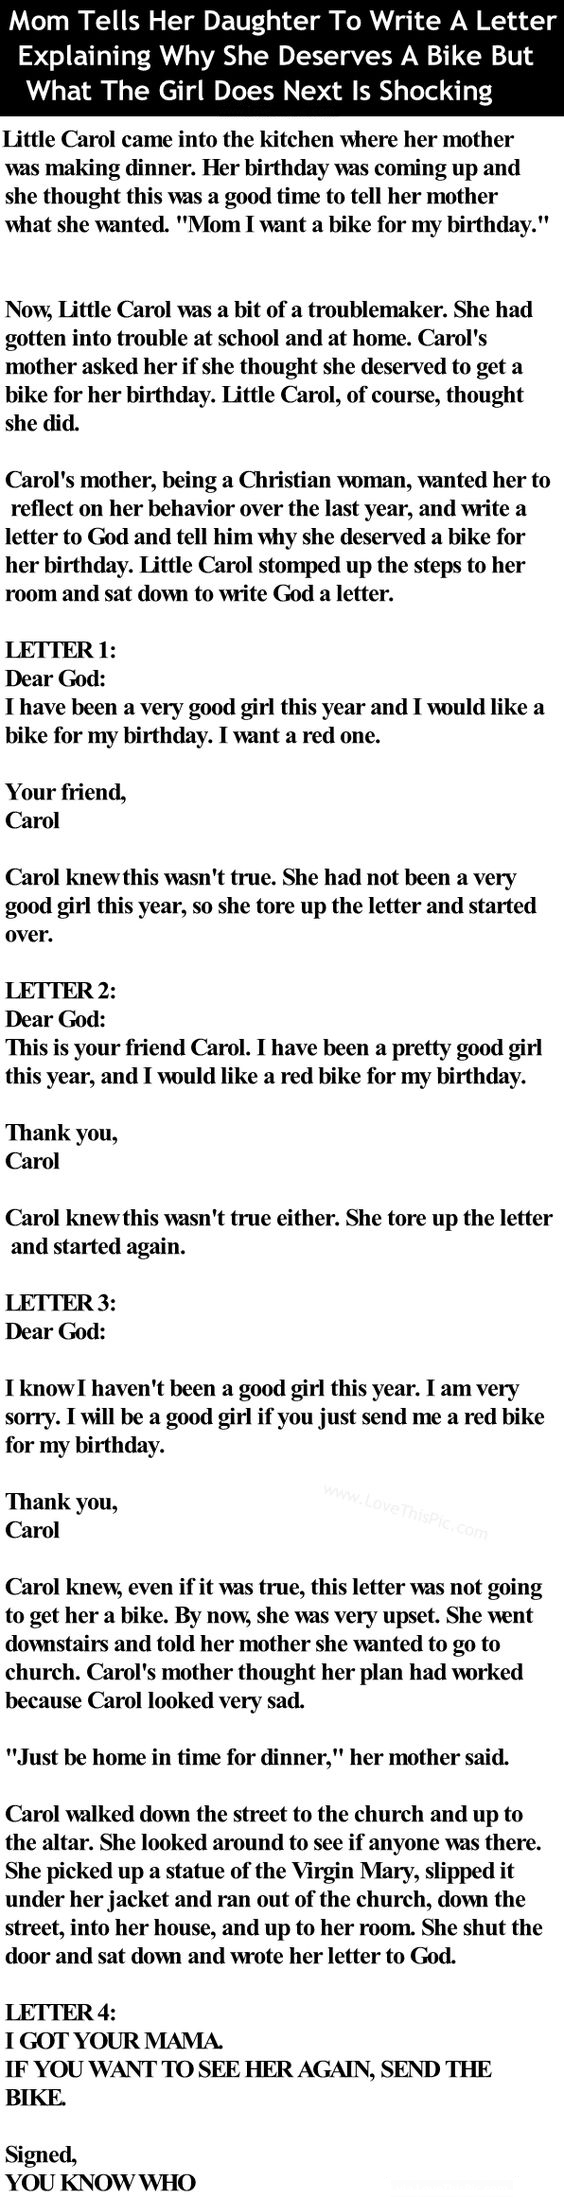 Mom tells her daughter to write a letter explaining why she deserves a bike but what the girl does next is shocking